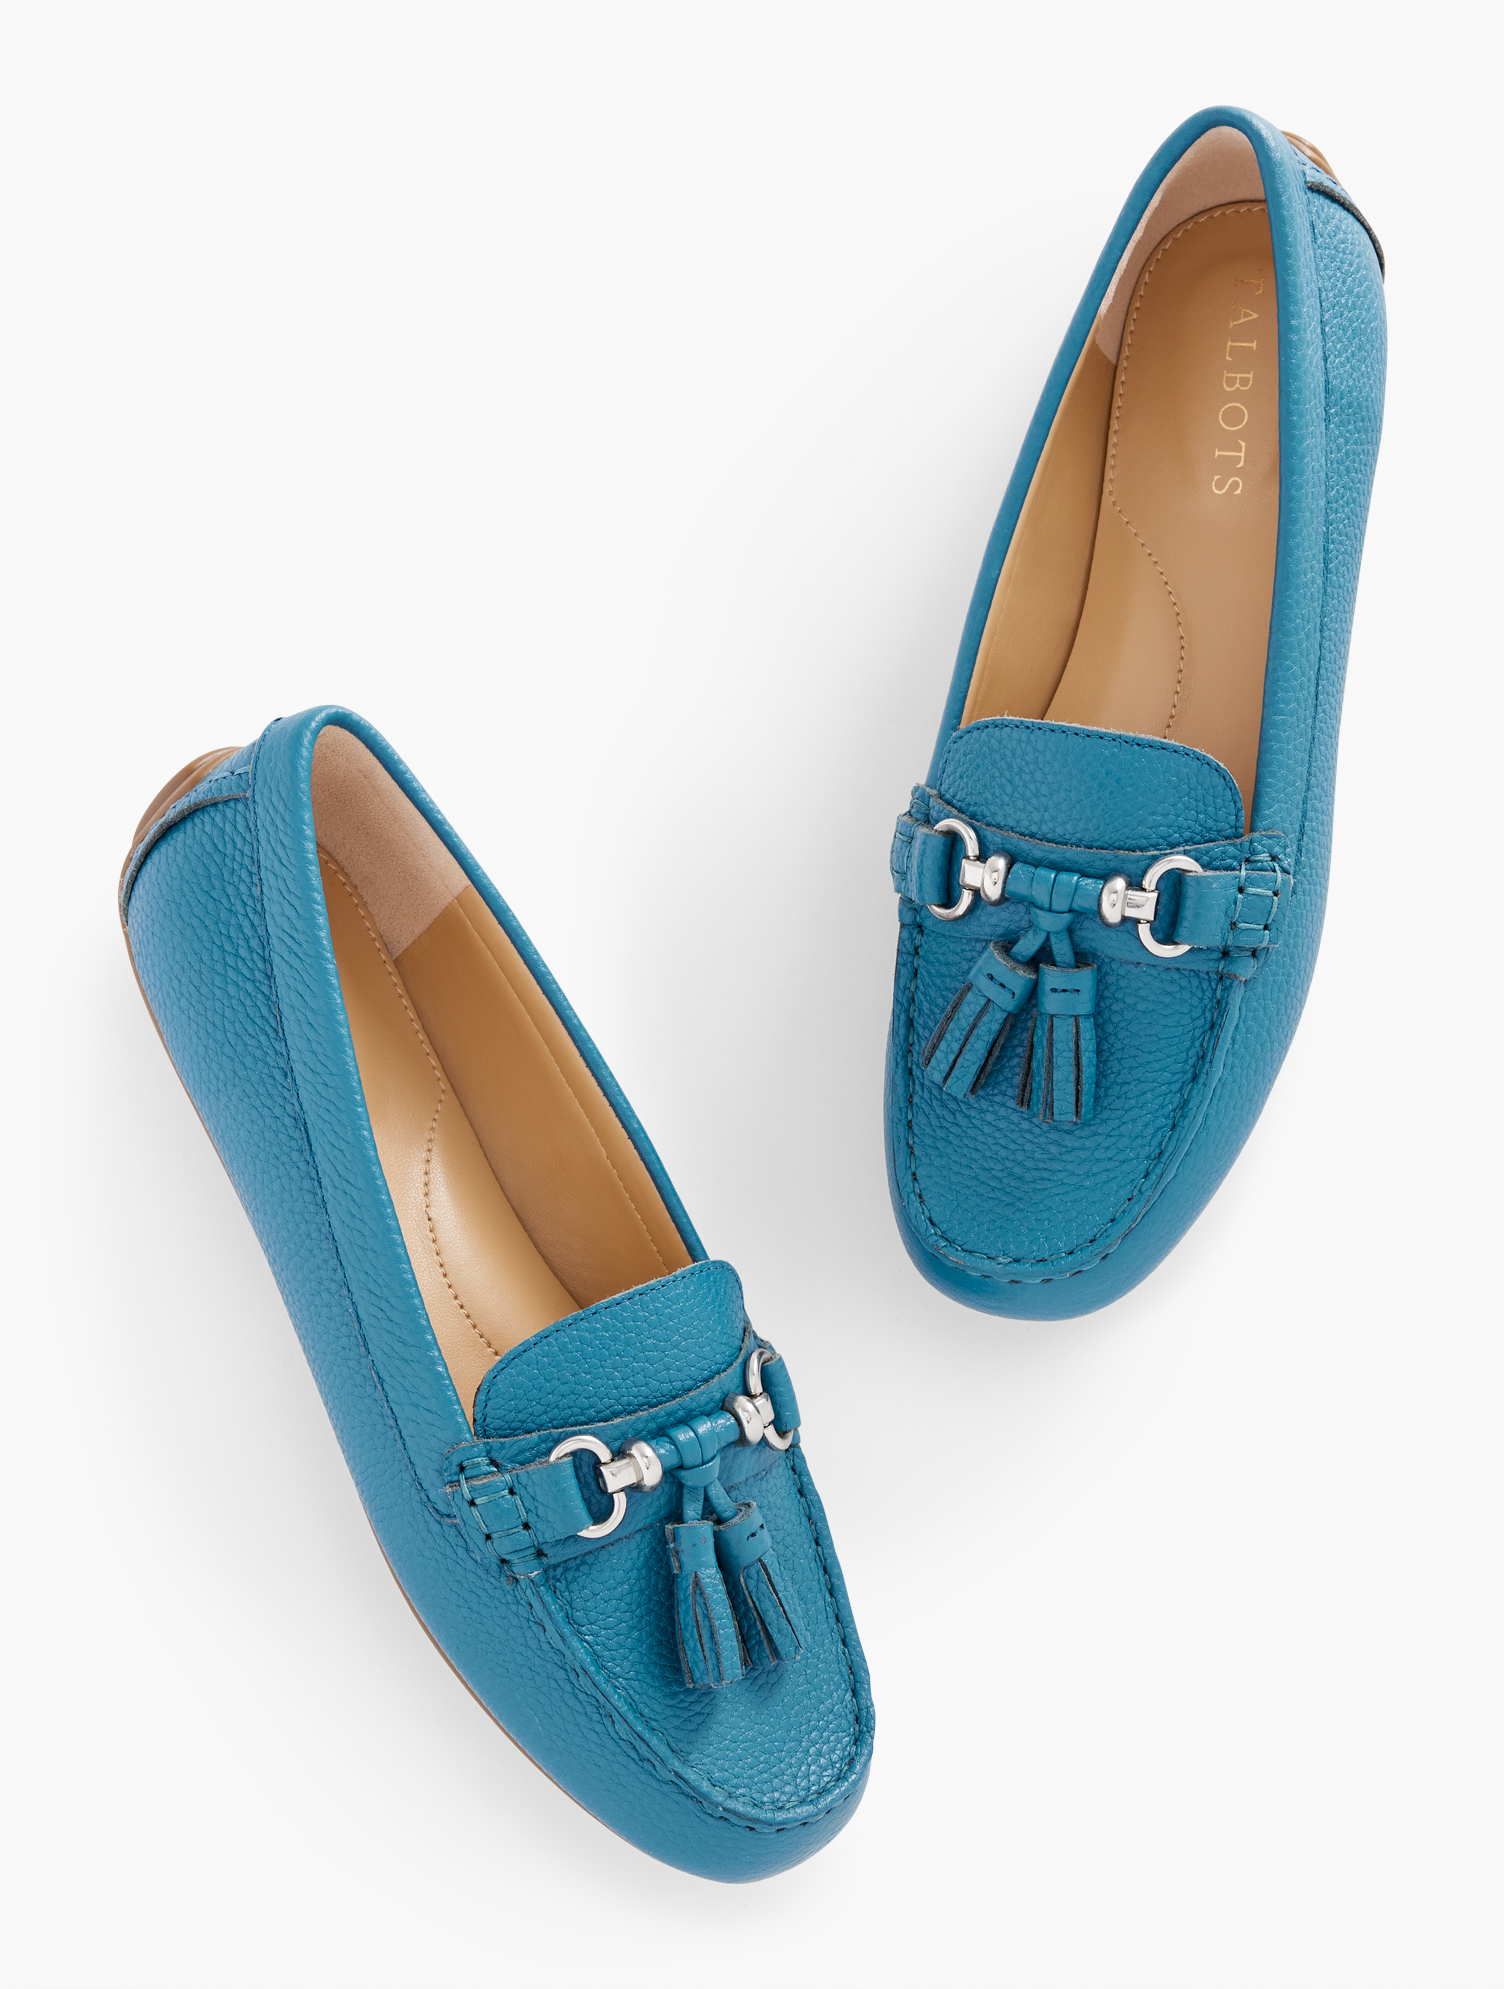 Talbots Everson Tassel Driving Moccasins Shoes - Leather - Teal Ocean - 8m